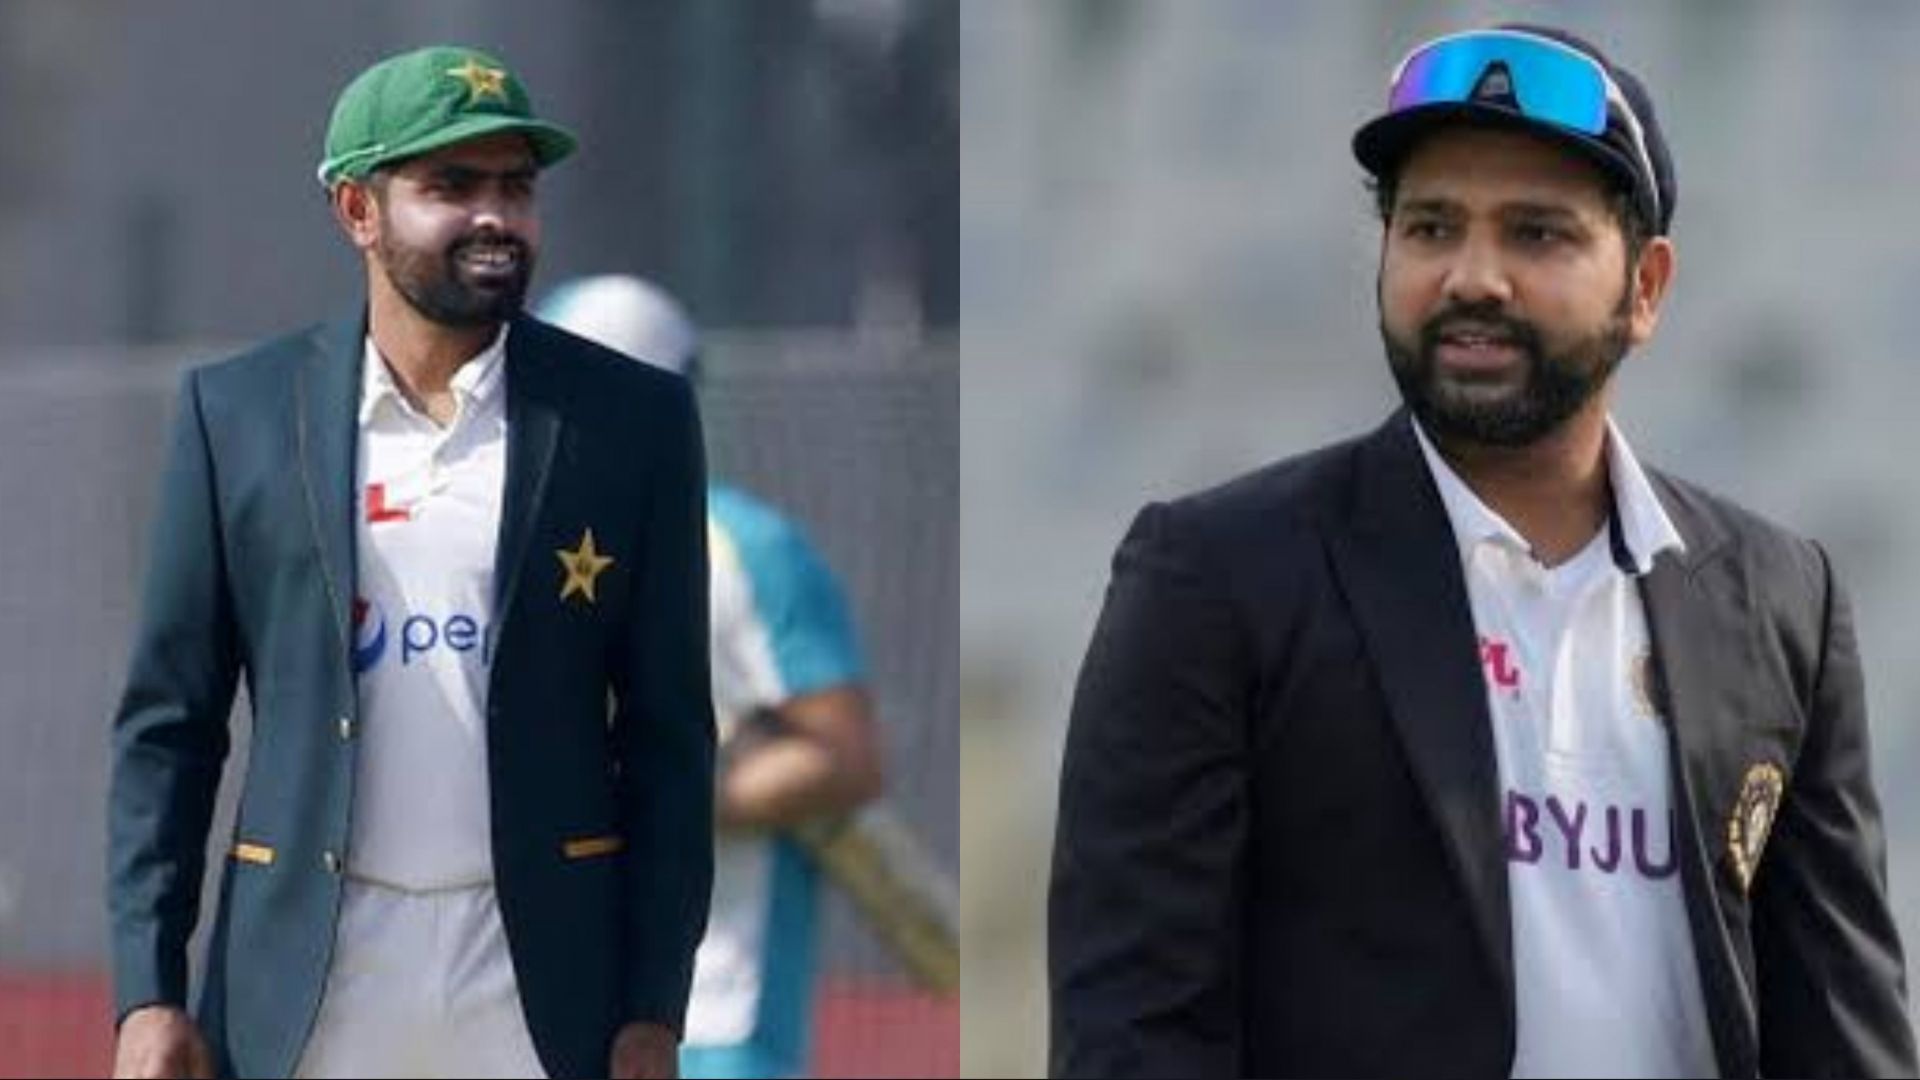 Babar Azam (L) and Rohit Sharma could walk out for the toss in the ICC World Test Championship final if certain results go their way.